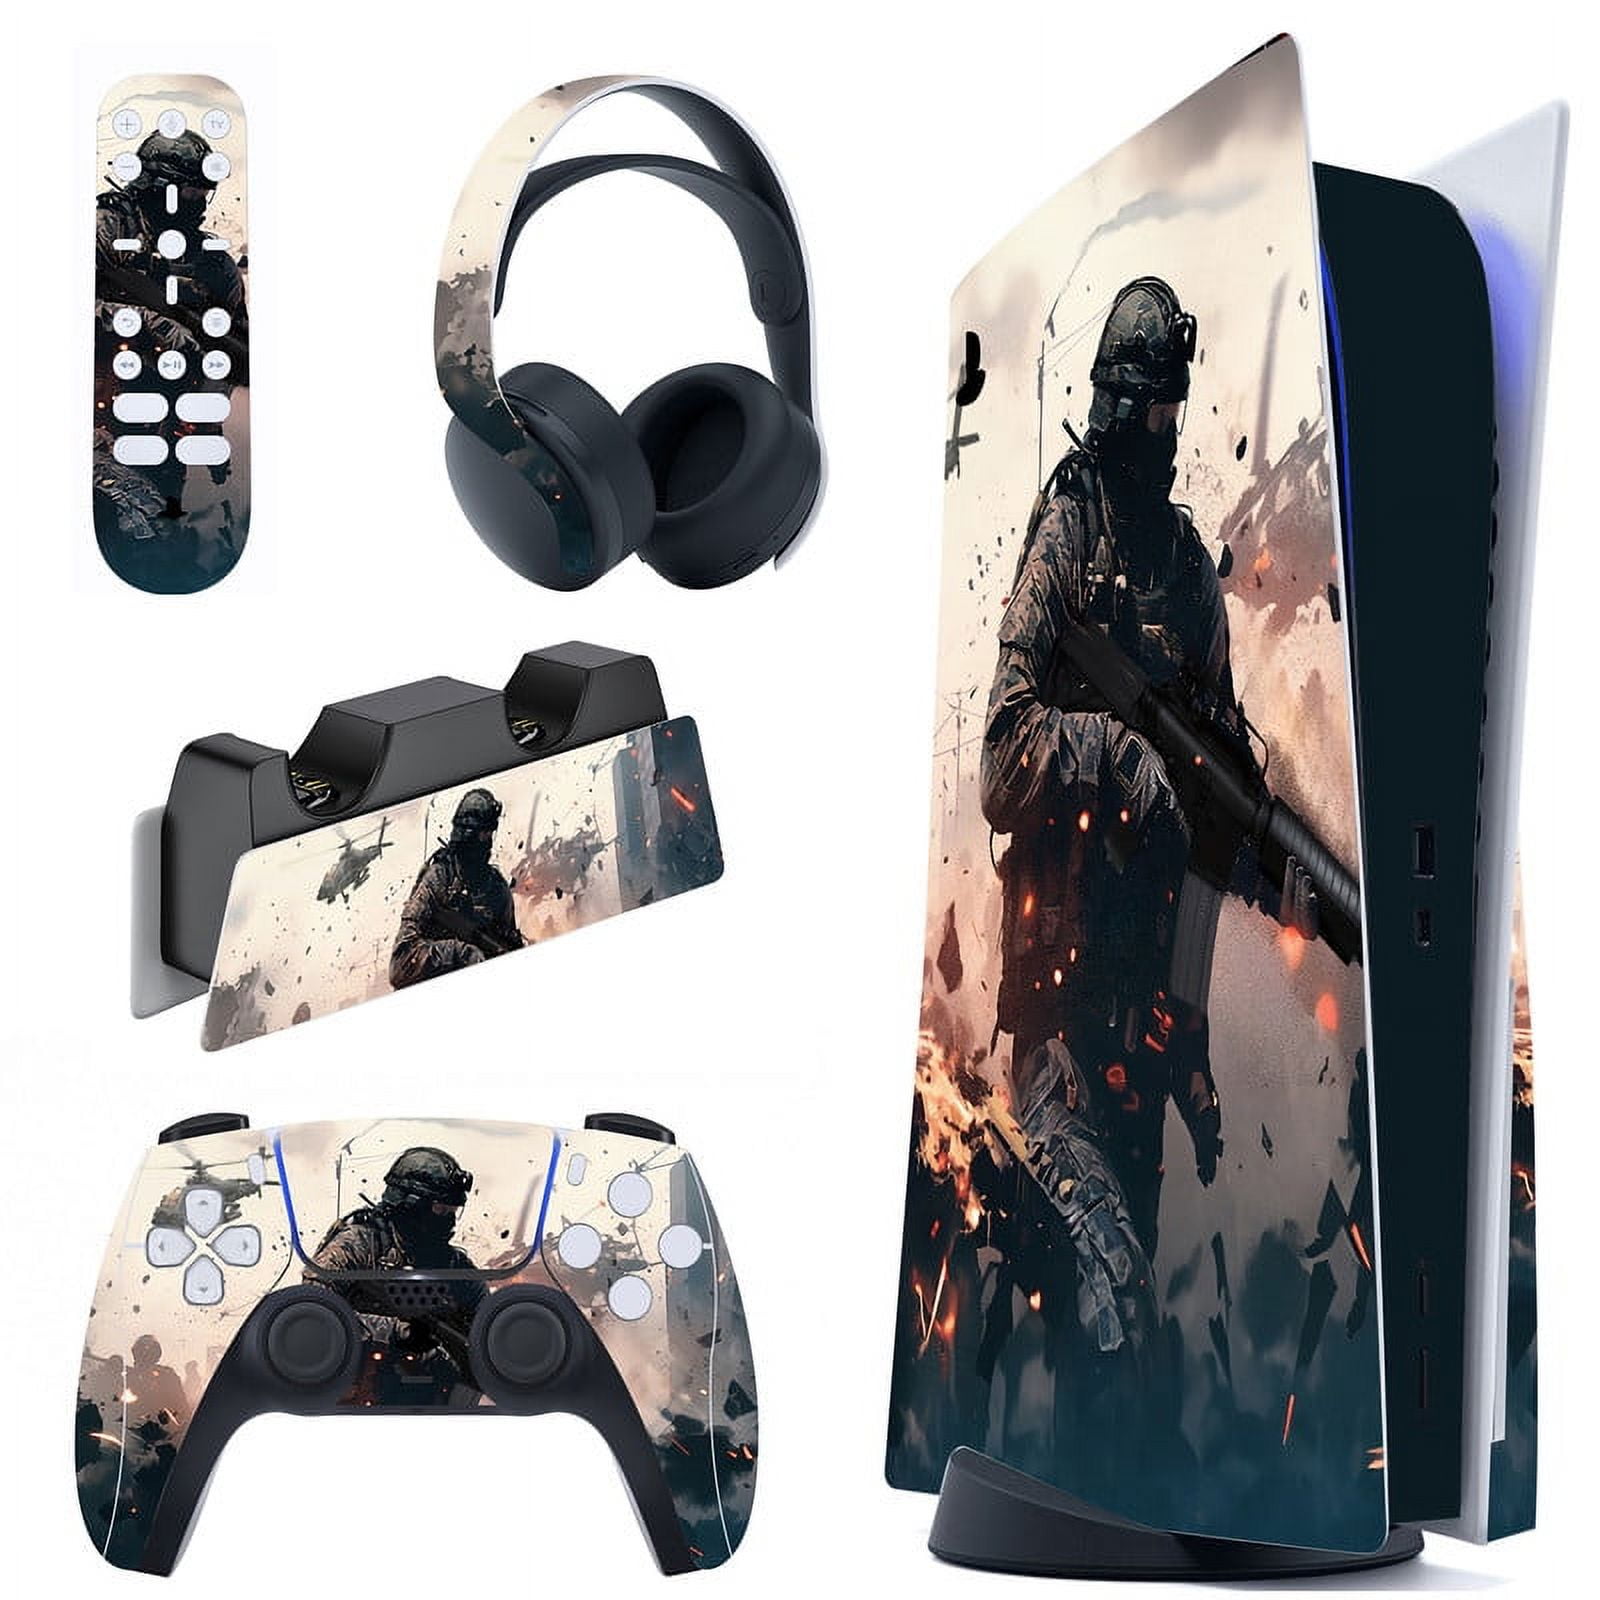 PlayVital Black Full Set Skin Decal for PS5 Console Digital Edition, Sticker  Vinyl Decal Cover for Playstation 5 Controller & Charging Station & Headset  & Media Remote price in UAE